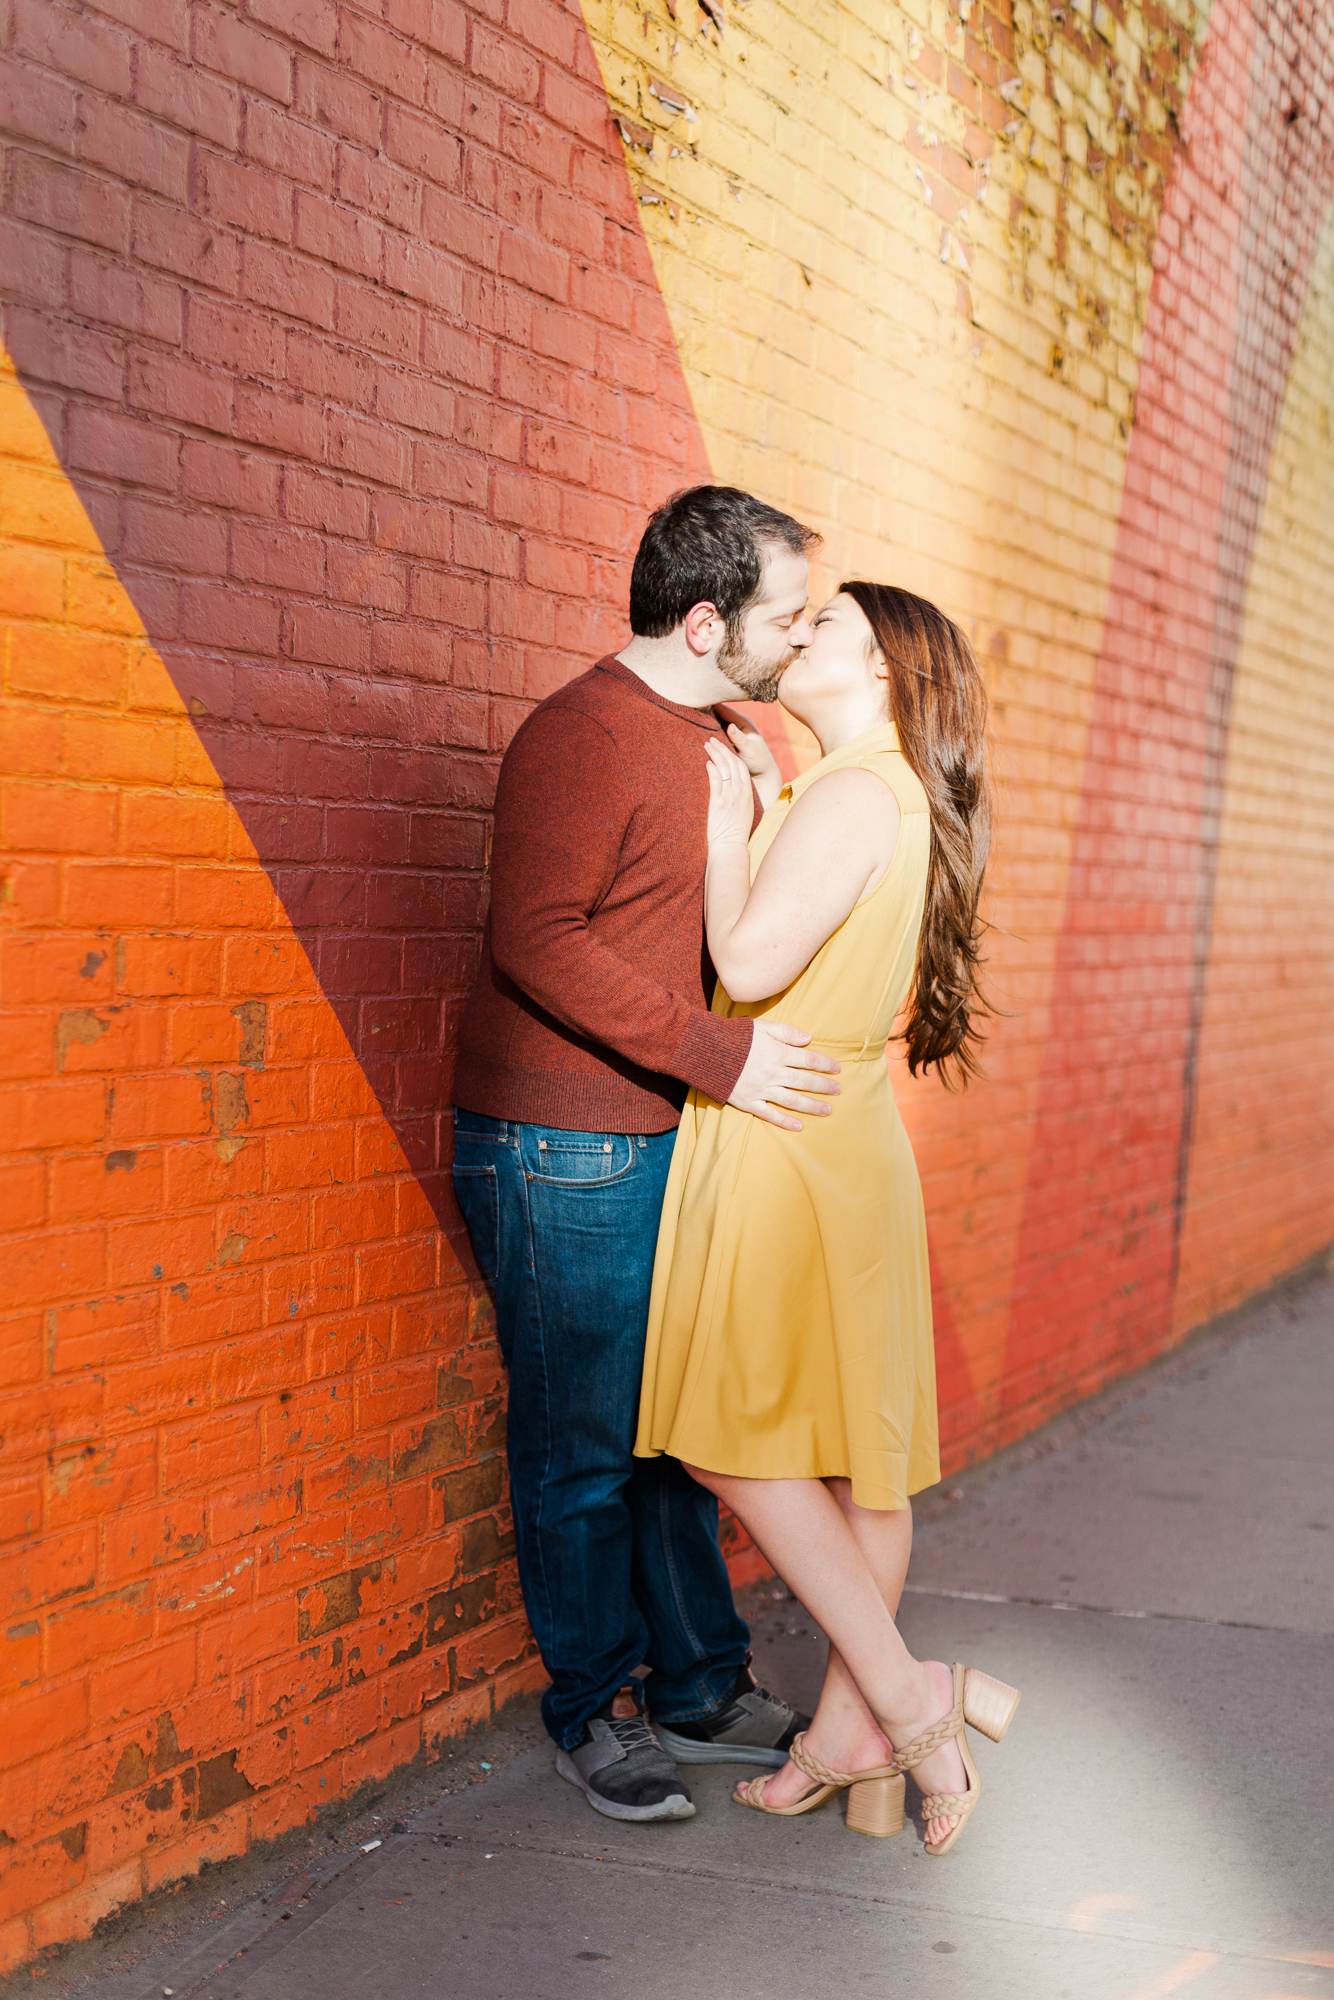 Vibrant Brooklyn Bridge Engagement Photography with Matching Outfits